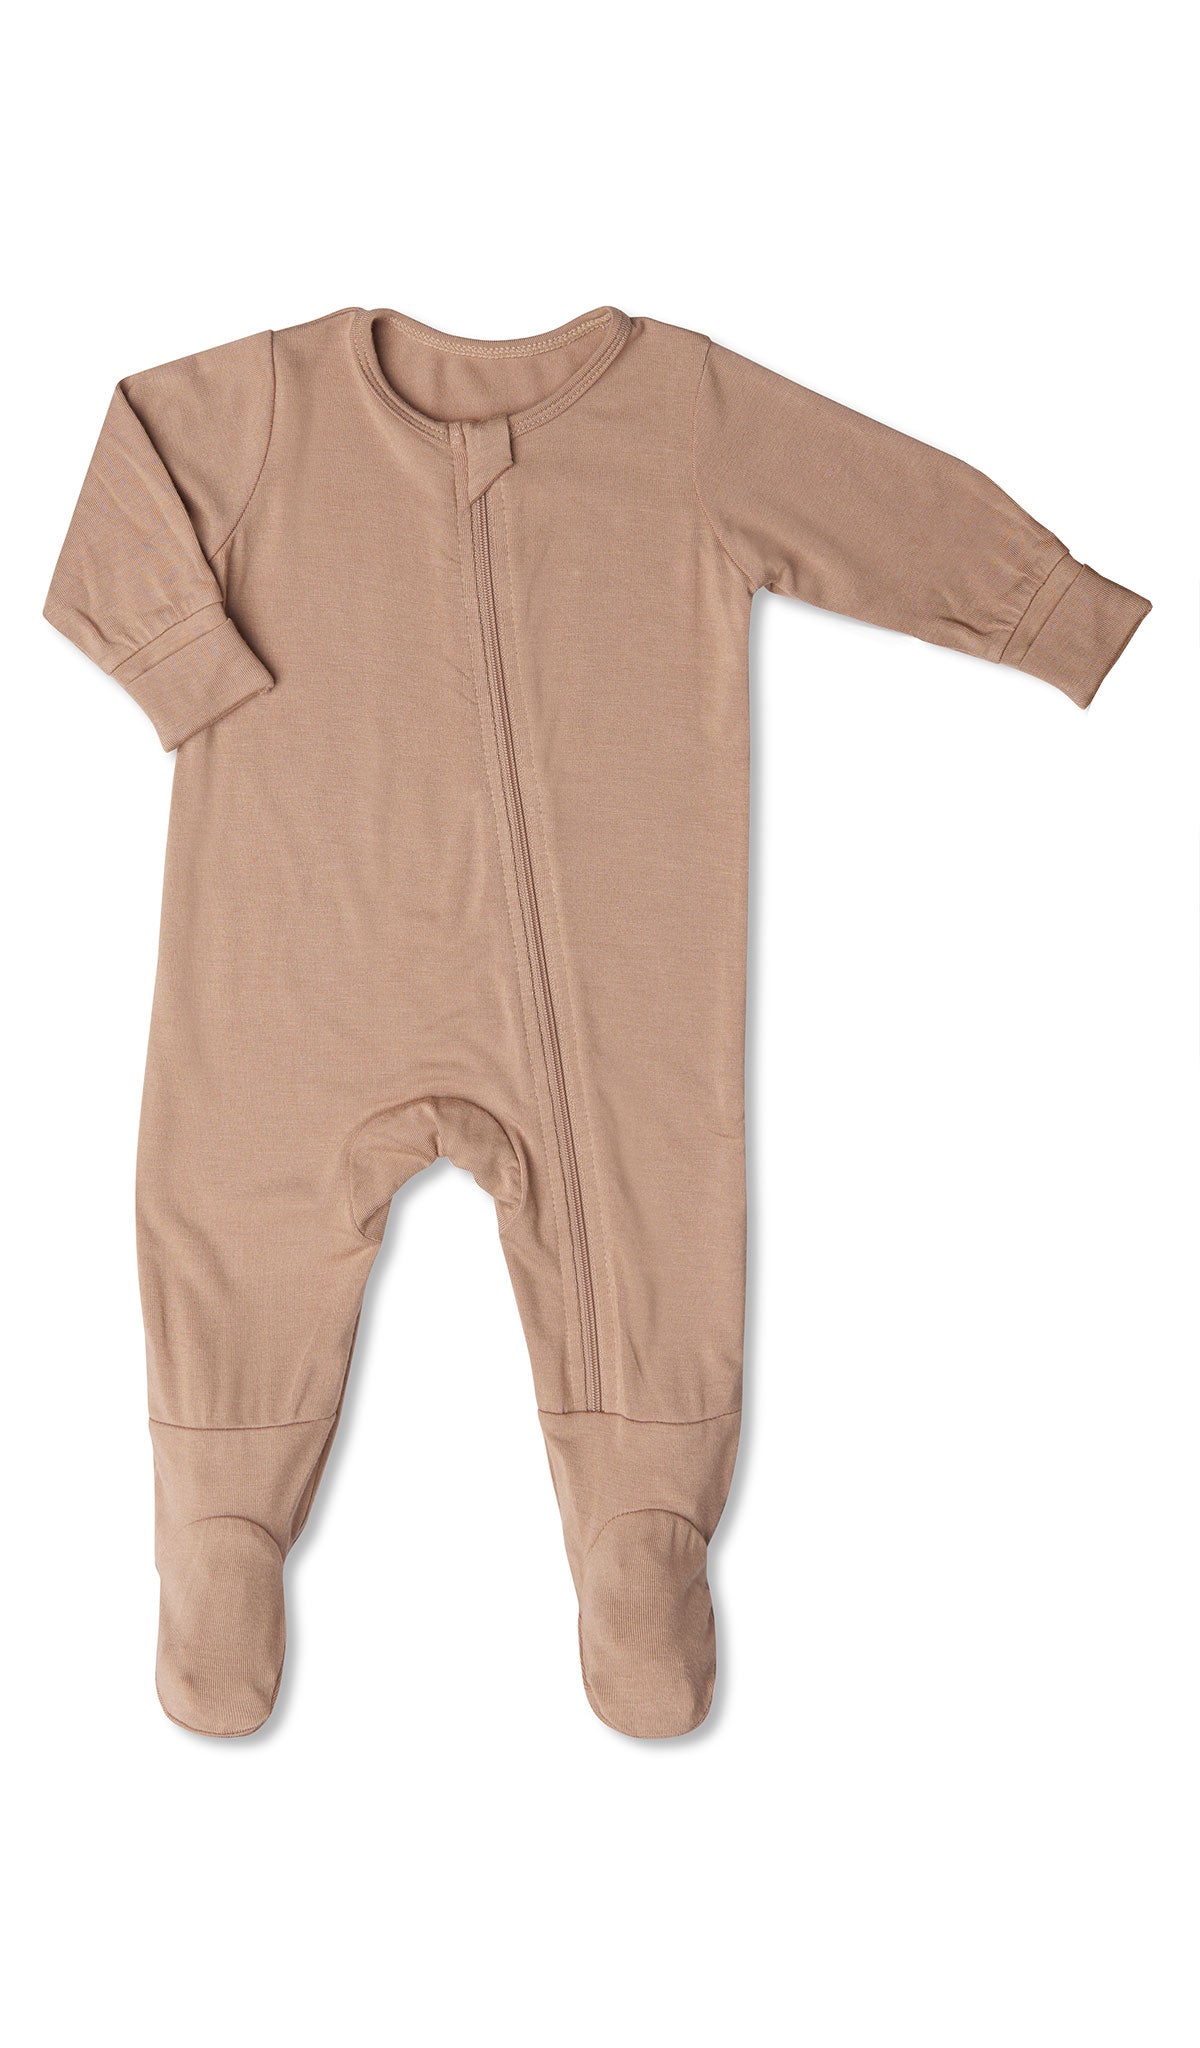 Latte Footie with long sleeves and zip front.